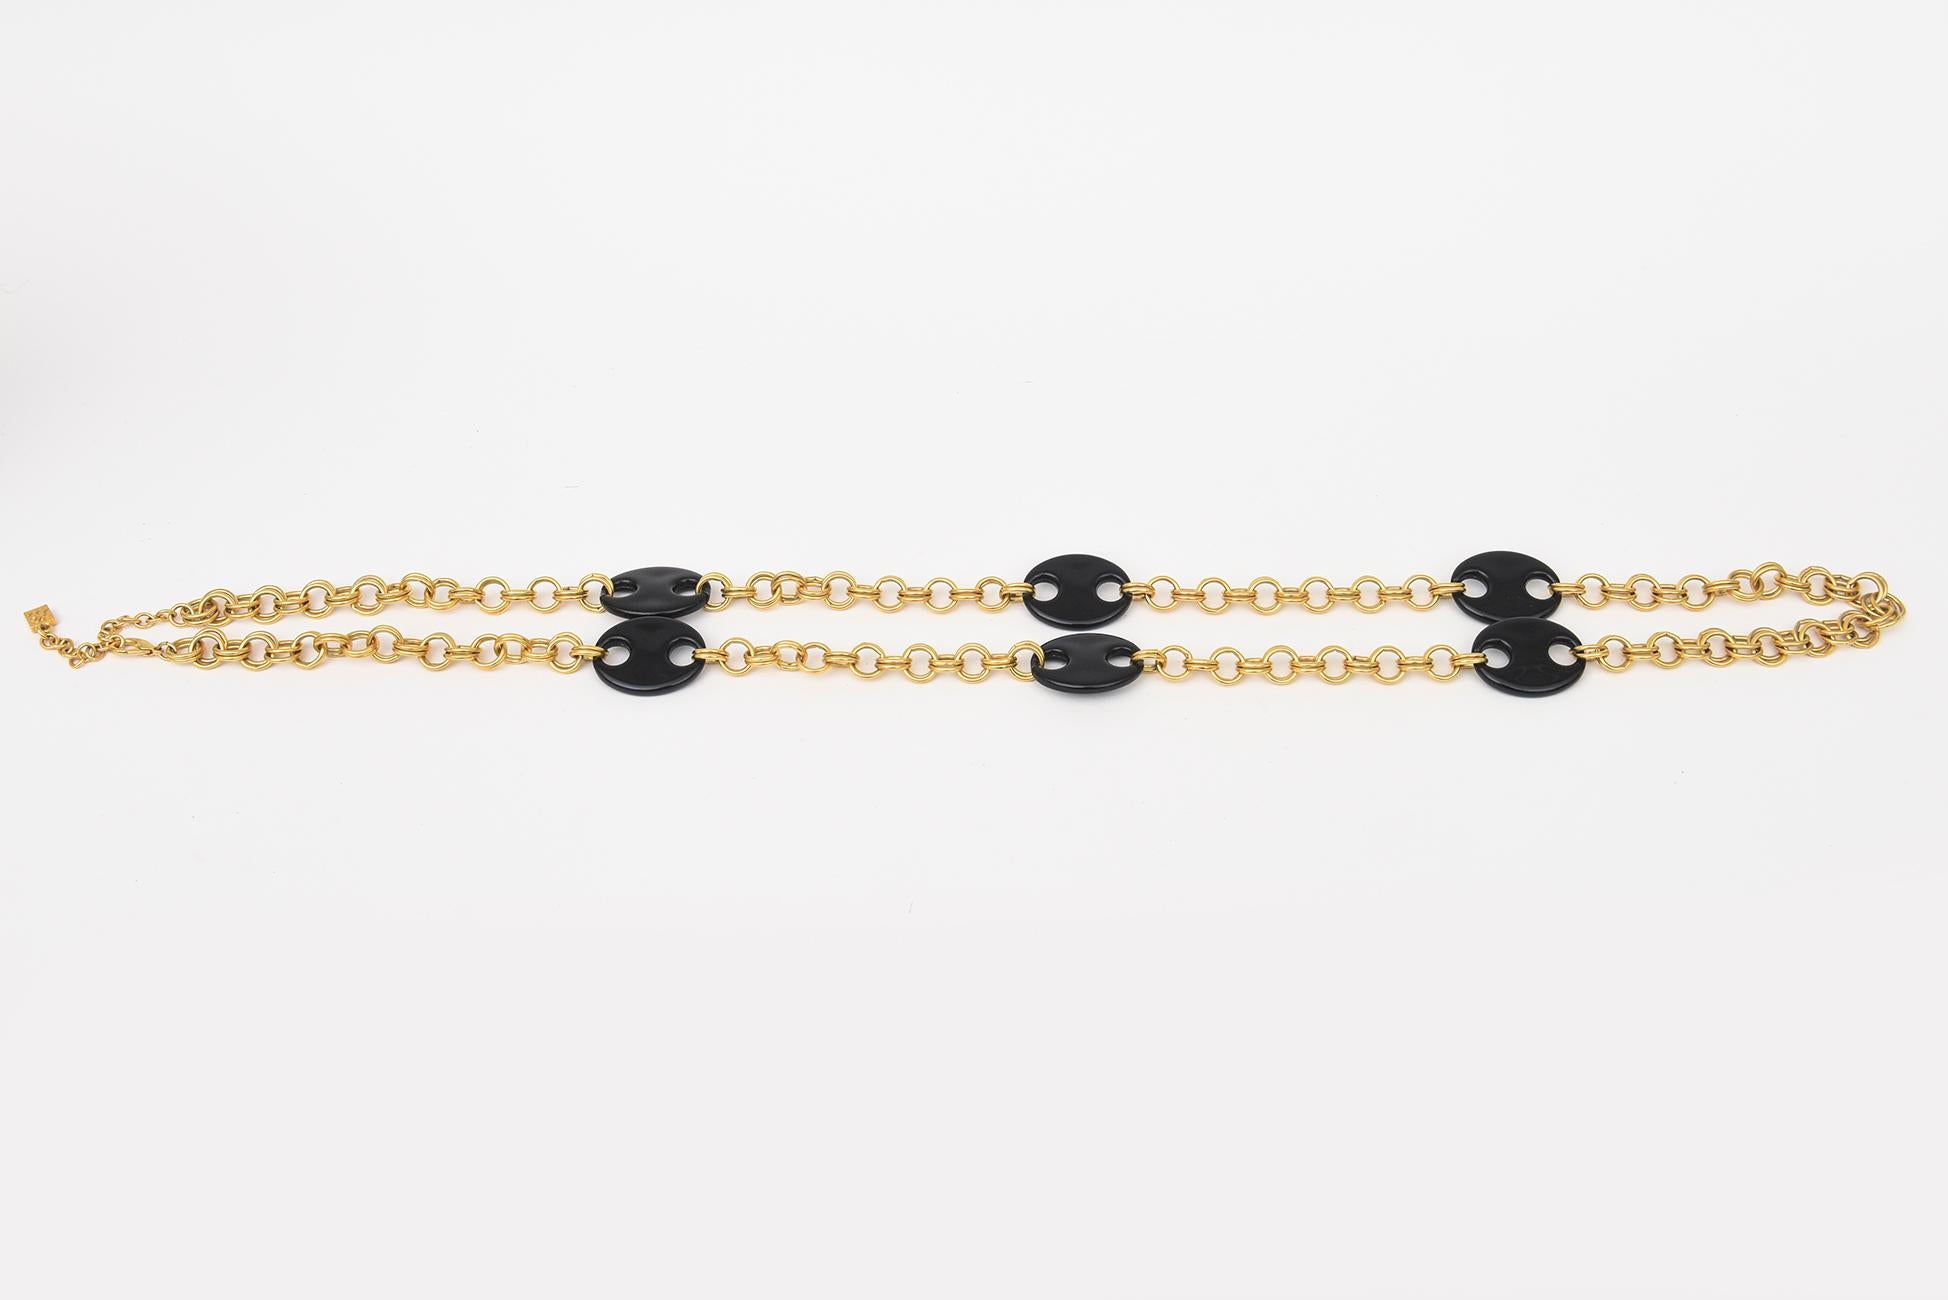 This fabulous and arresting vintage 1980's Karl Lagerfeld necklace is called the mariner necklace and wraps many times over on the neck or can be staggered. It is a brass metal chain called rolo links of 2 intertwined circles with interspersed black